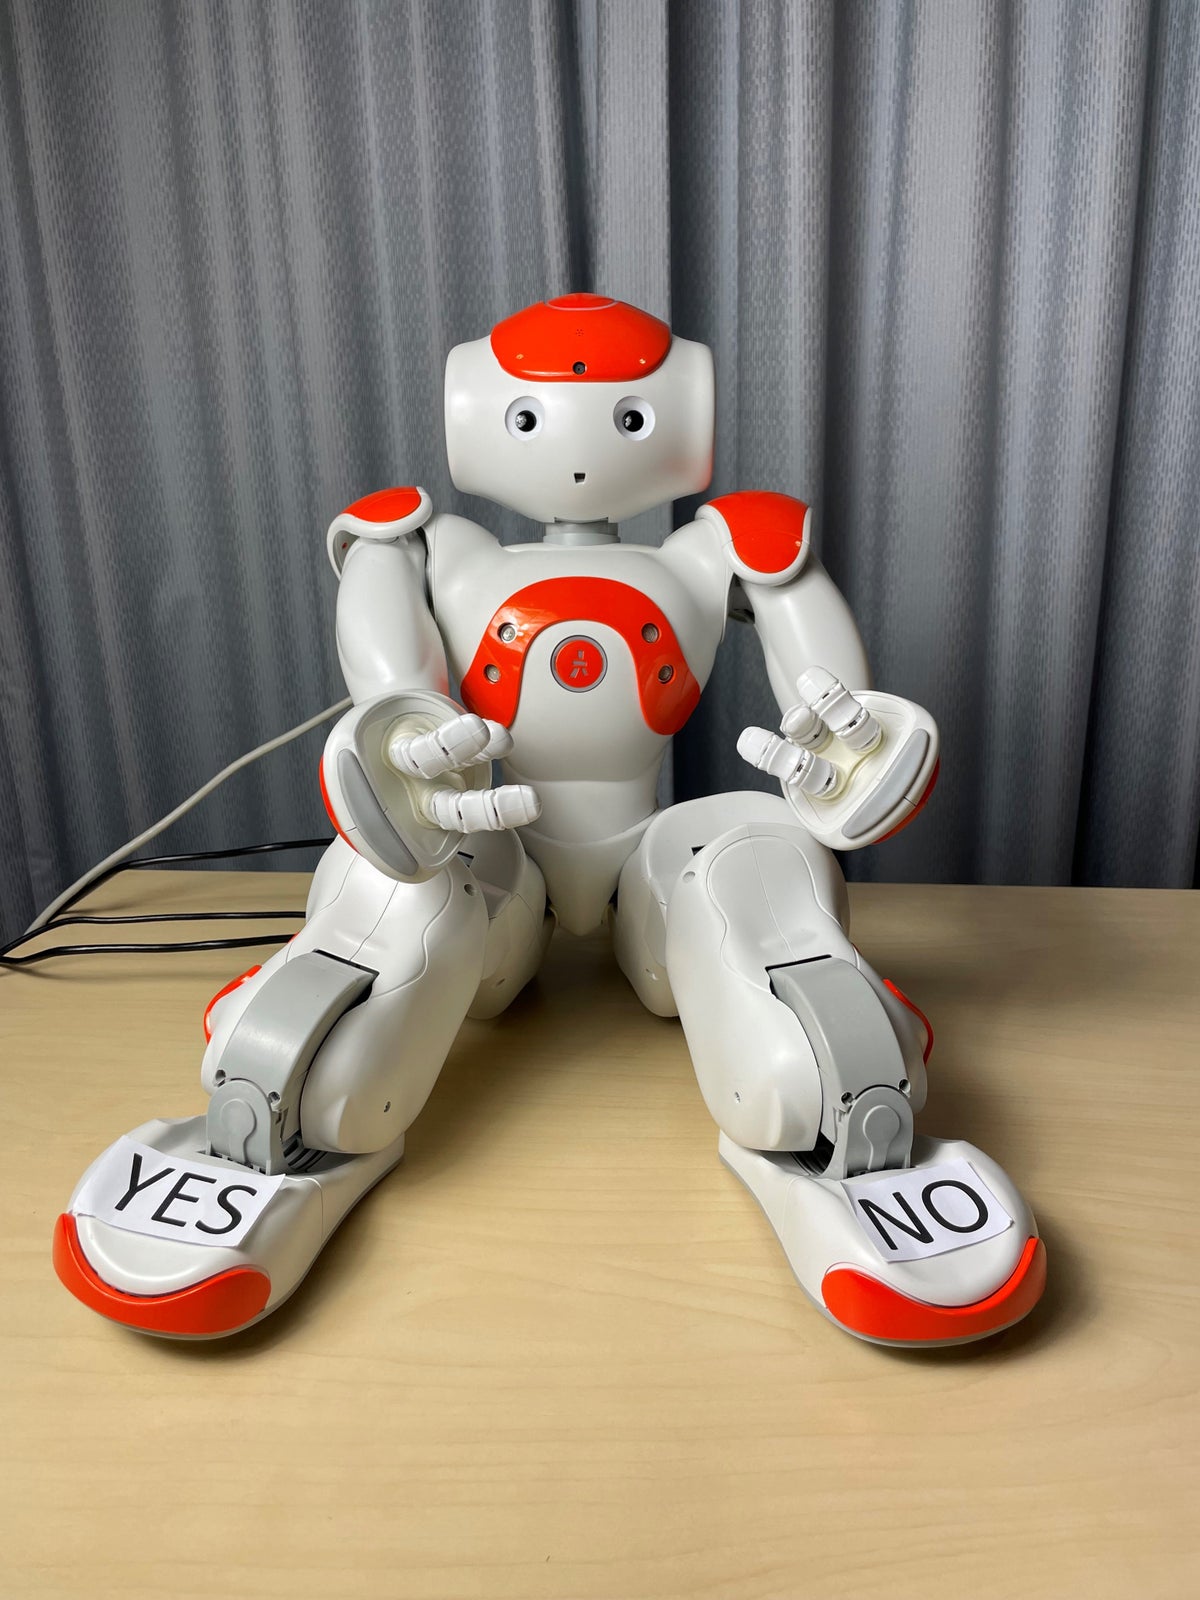 Robots could help to detect mental wellbeing issues in children, study finds